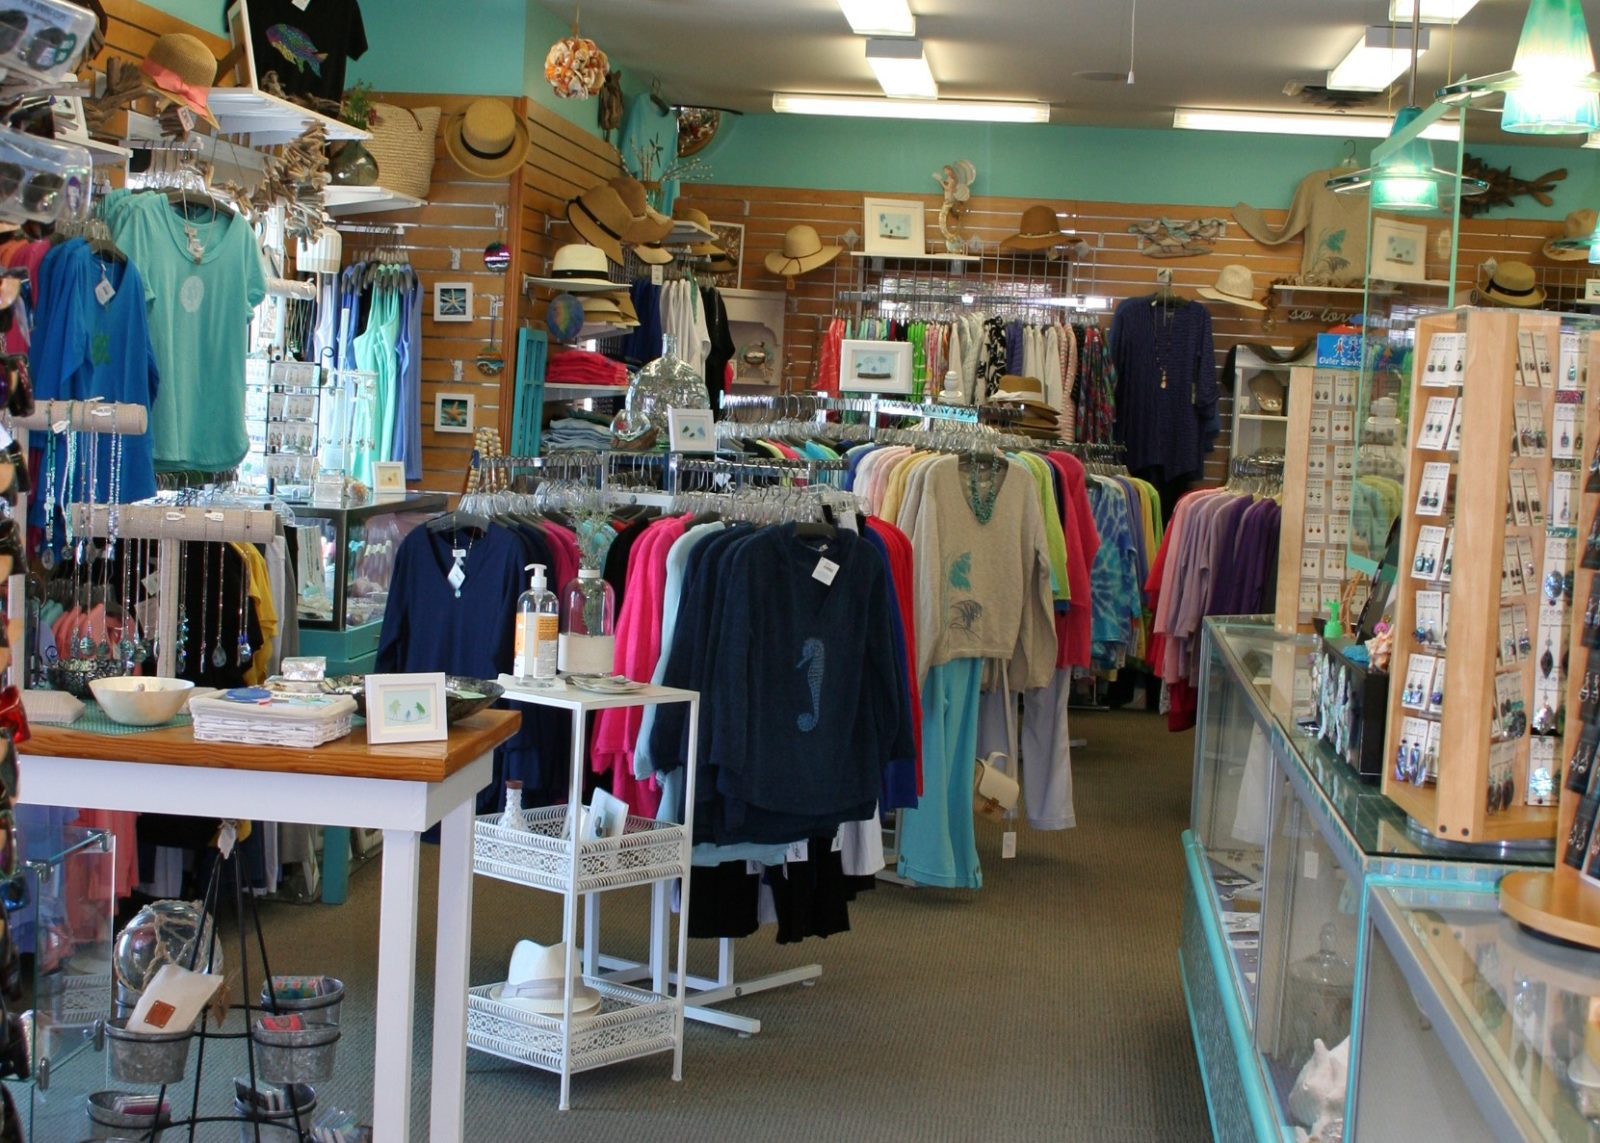 OBX Art, Clothing, and Jewelry